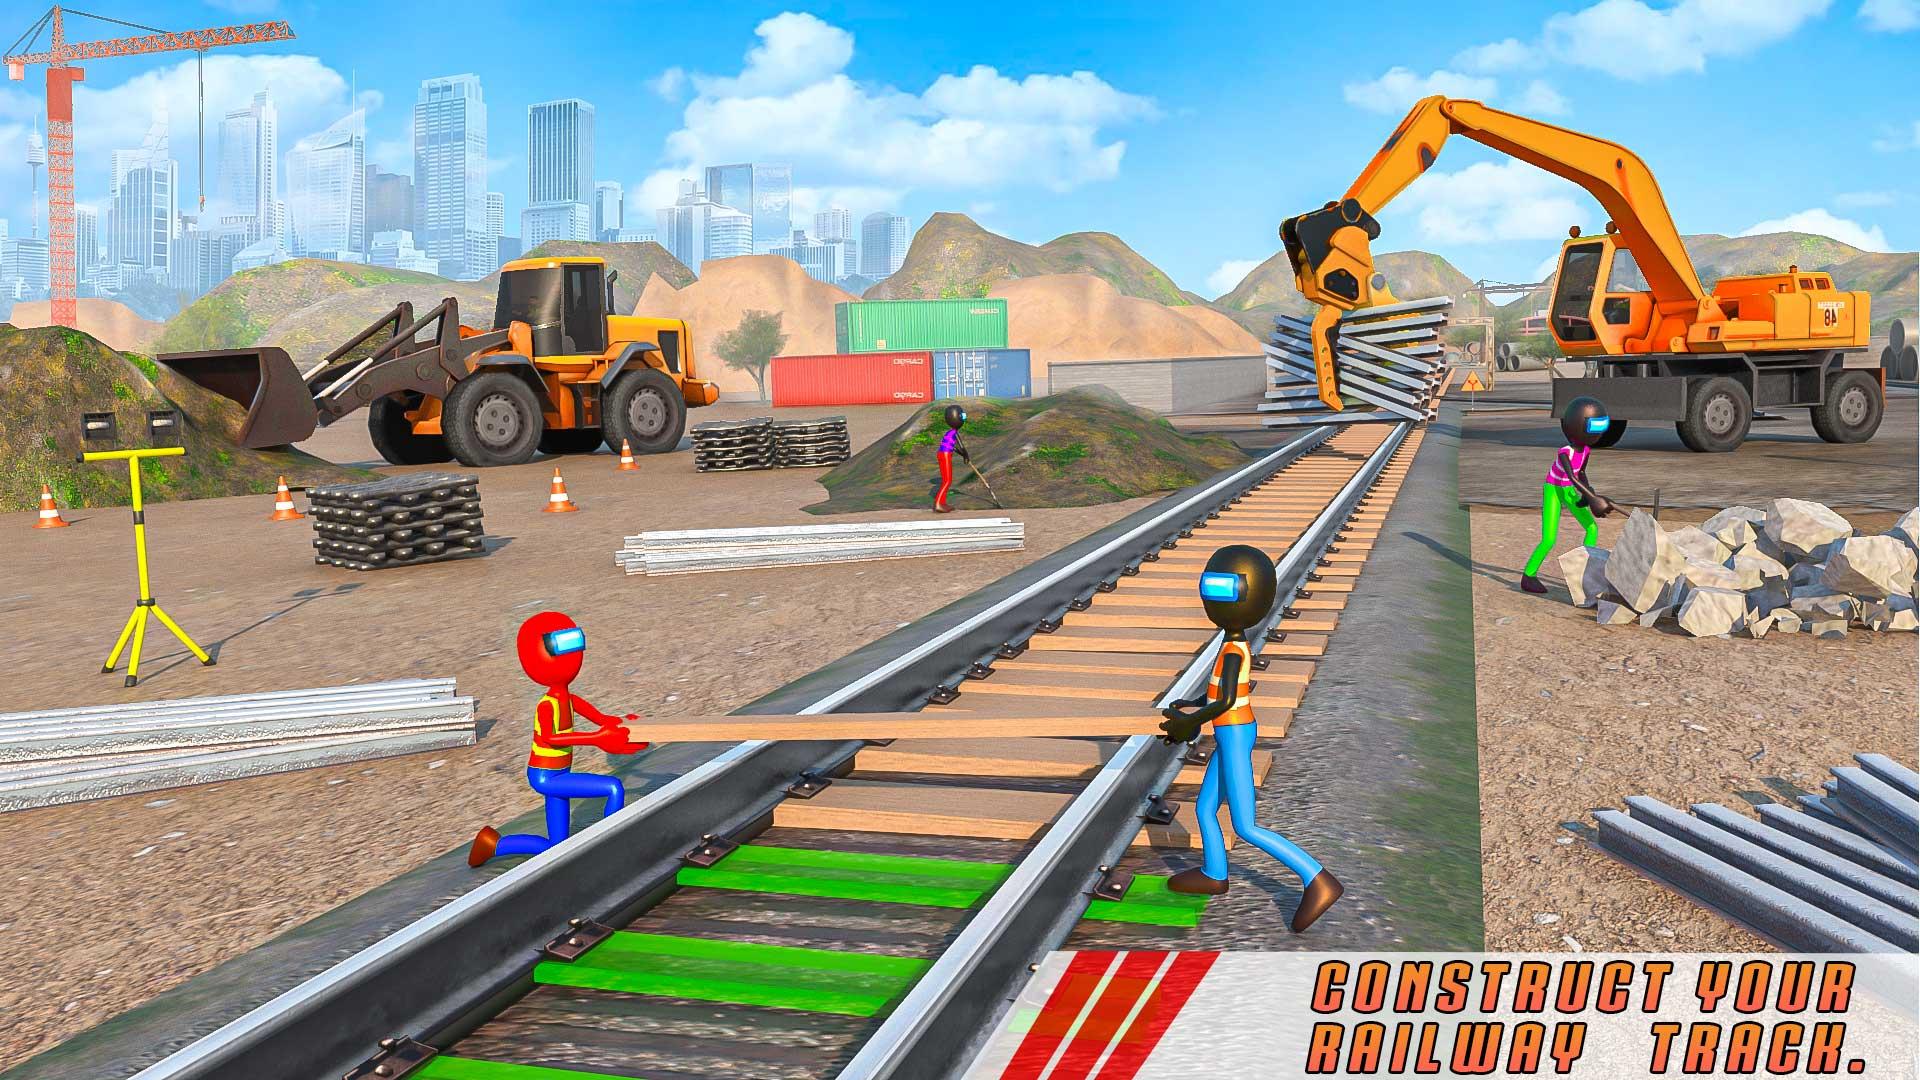 Grand Construction Excavator: Red Imposter Game 1.0 Screenshot 3